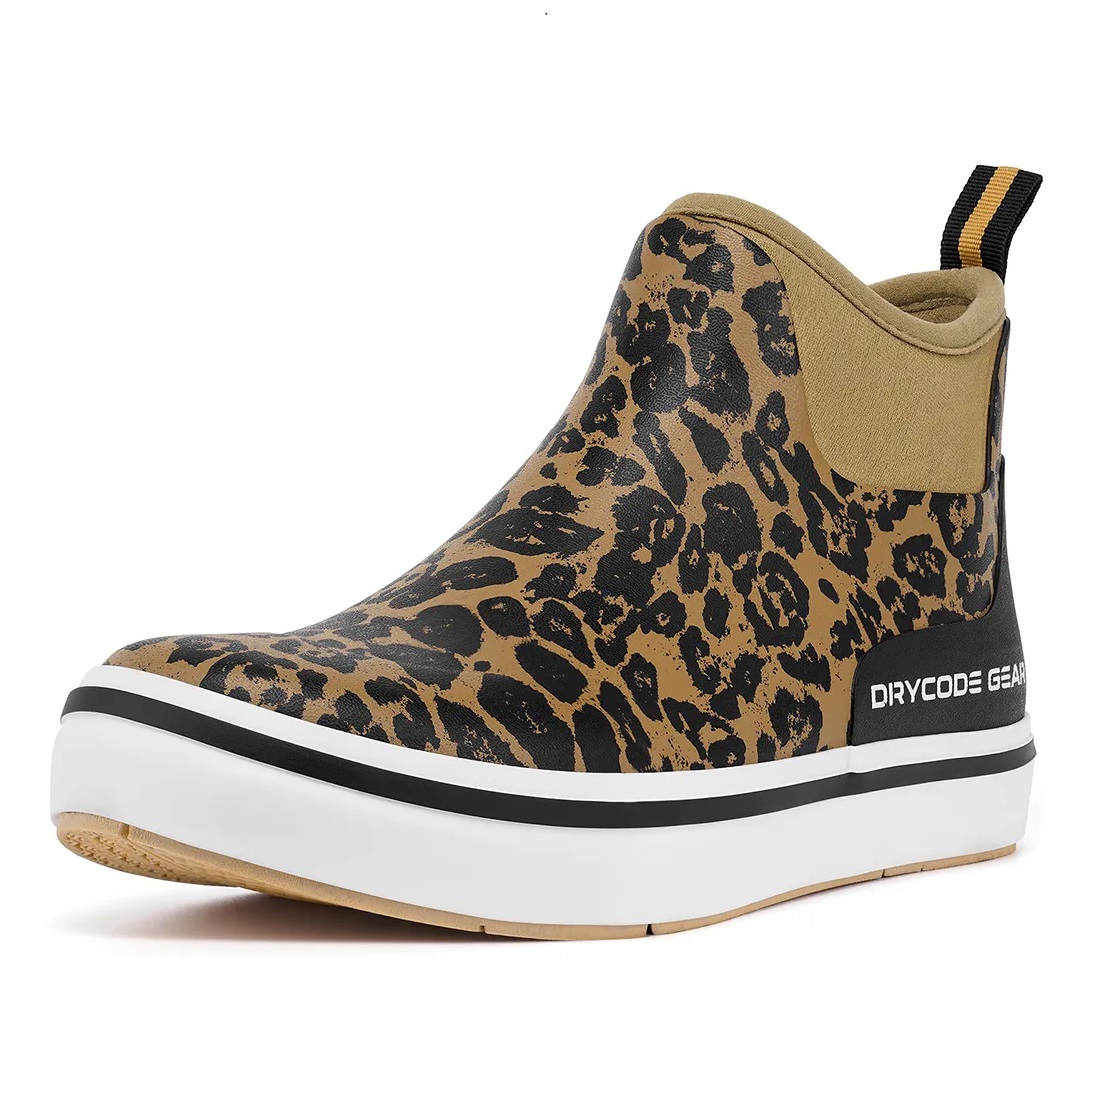 DRYCODE Deck Fishing Boots （Leopard Print）, Anti-Slip Rubber Ankle Boo